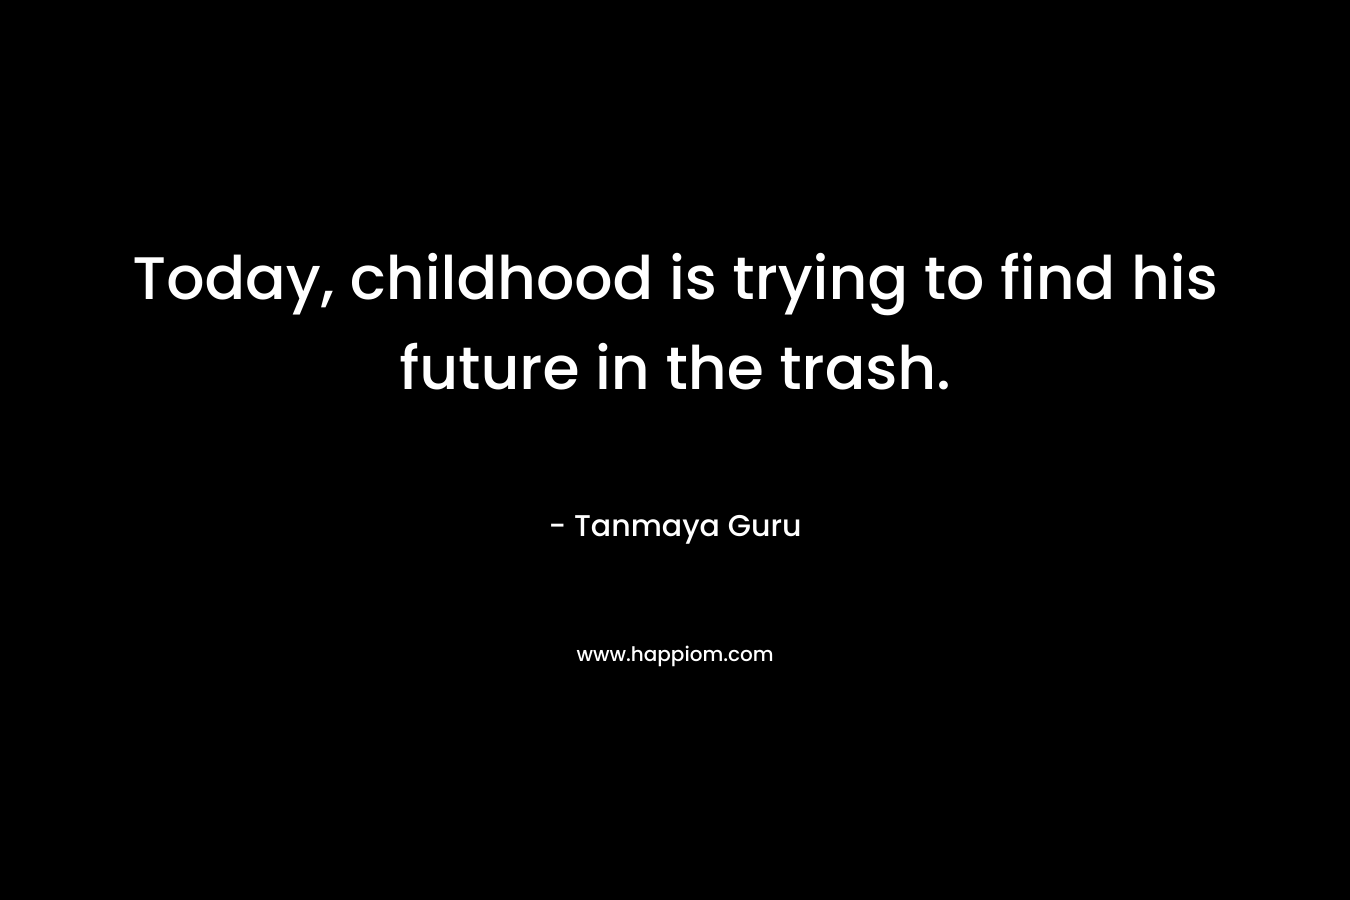 Today, childhood is trying to find his future in the trash. – Tanmaya Guru